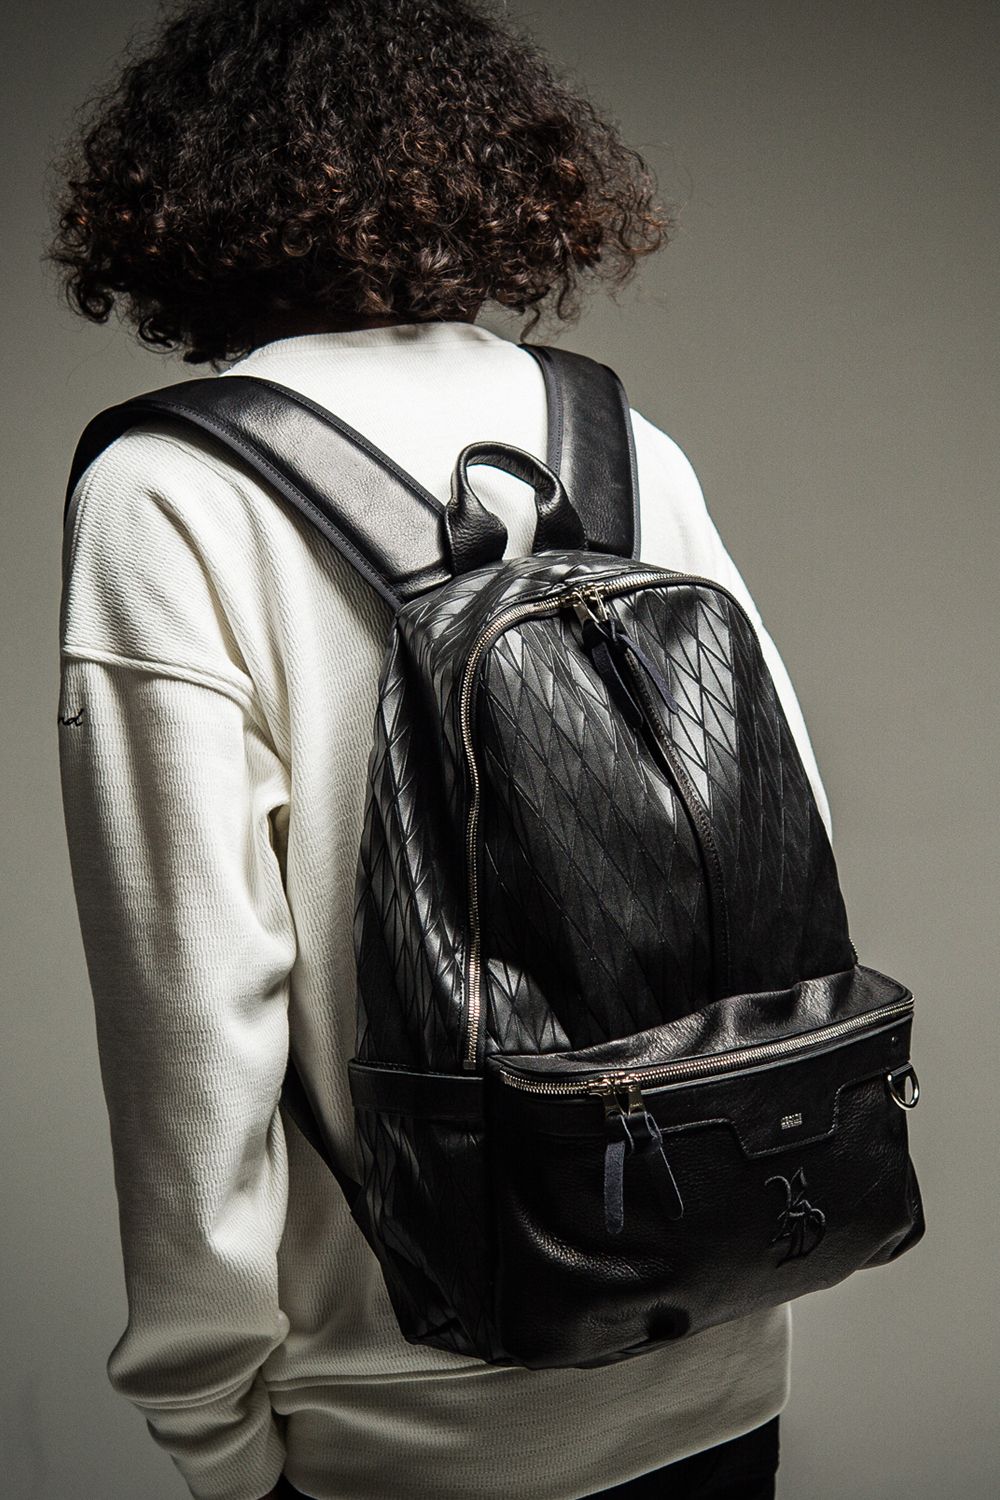 RESOUND CLOTHING - DECADE COLLABO BACK PACK / リサウンド ...